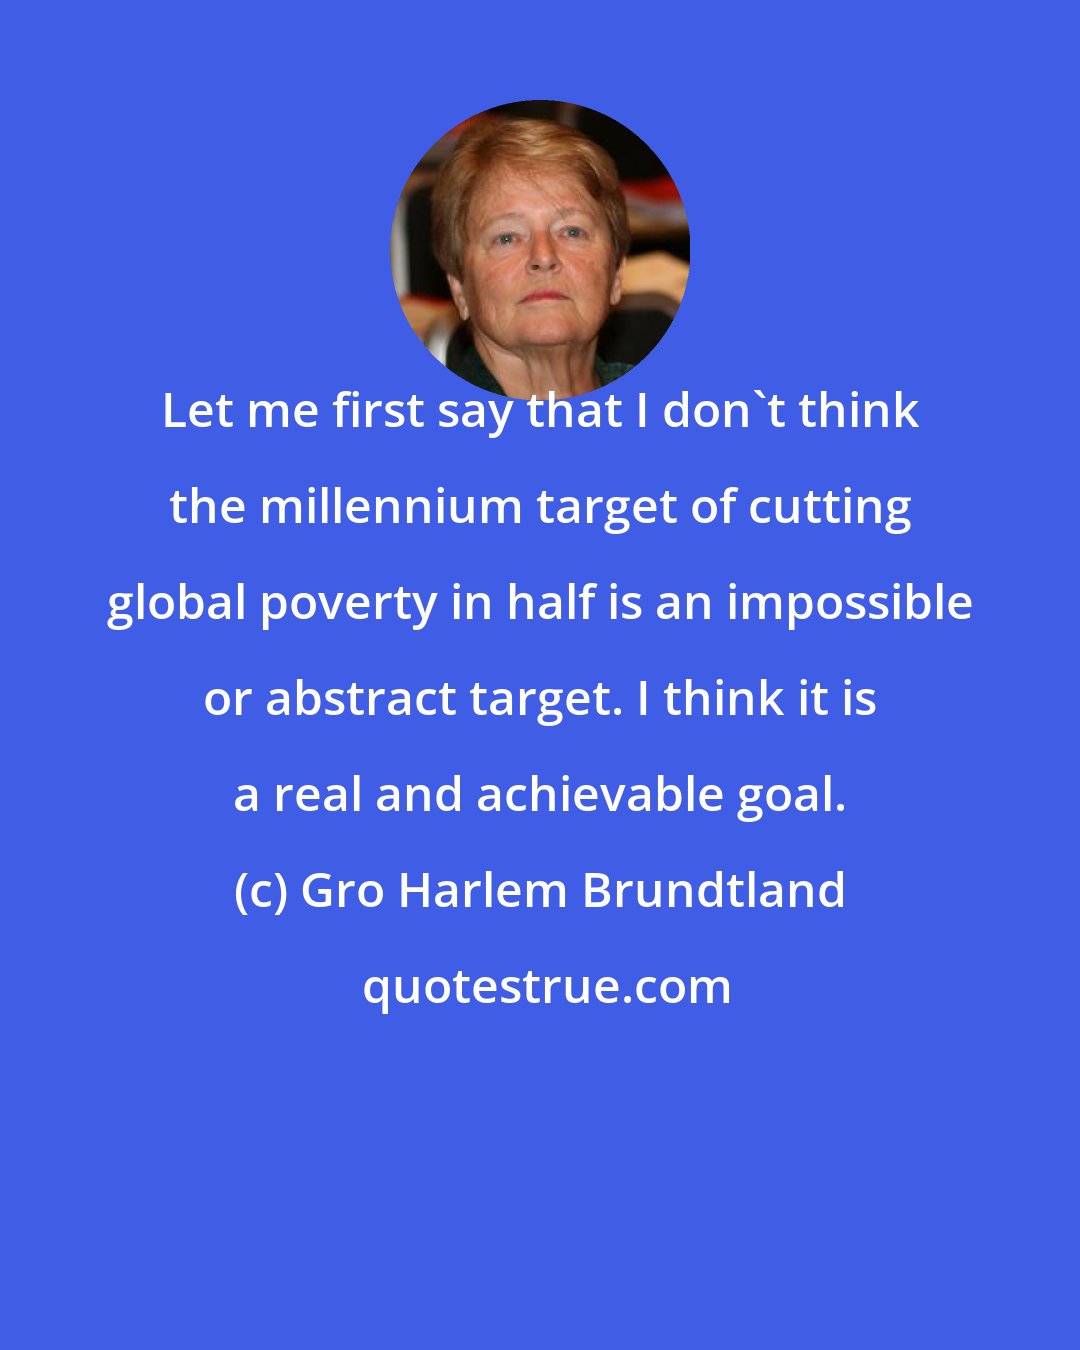 Gro Harlem Brundtland: Let me first say that I don't think the millennium target of cutting global poverty in half is an impossible or abstract target. I think it is a real and achievable goal.